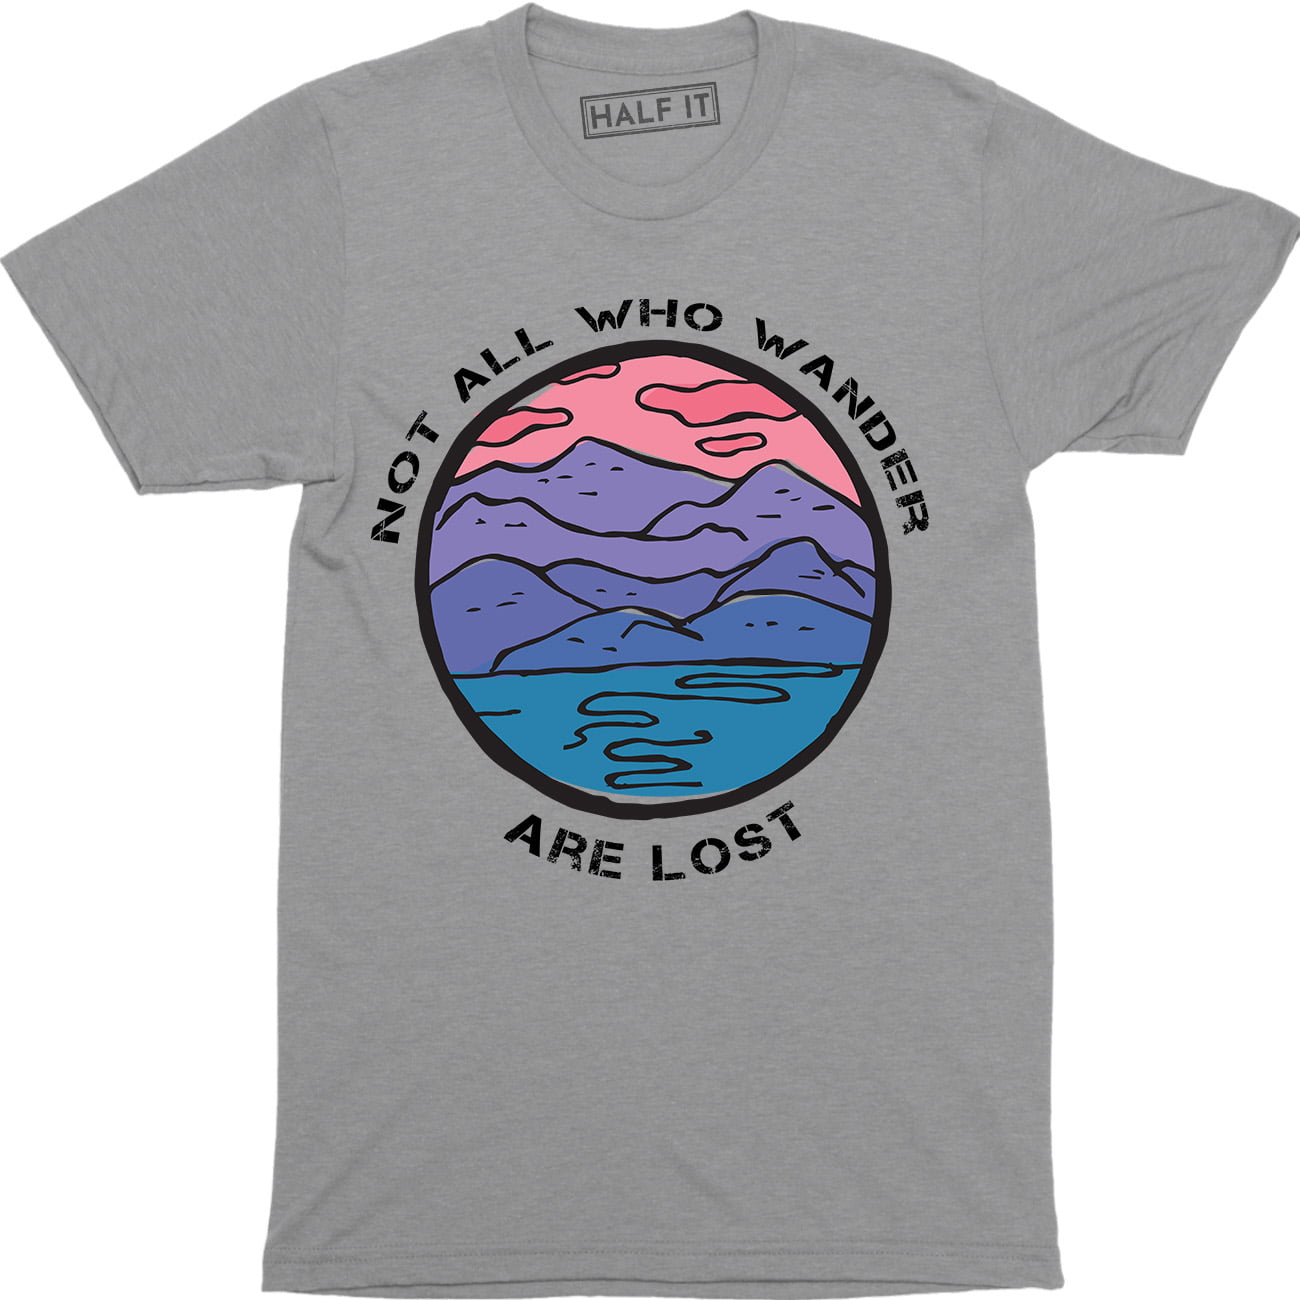 Not All Who Wander Are Lost Slogan Printed Ladies T-Shirt quote Tee Shirts Women